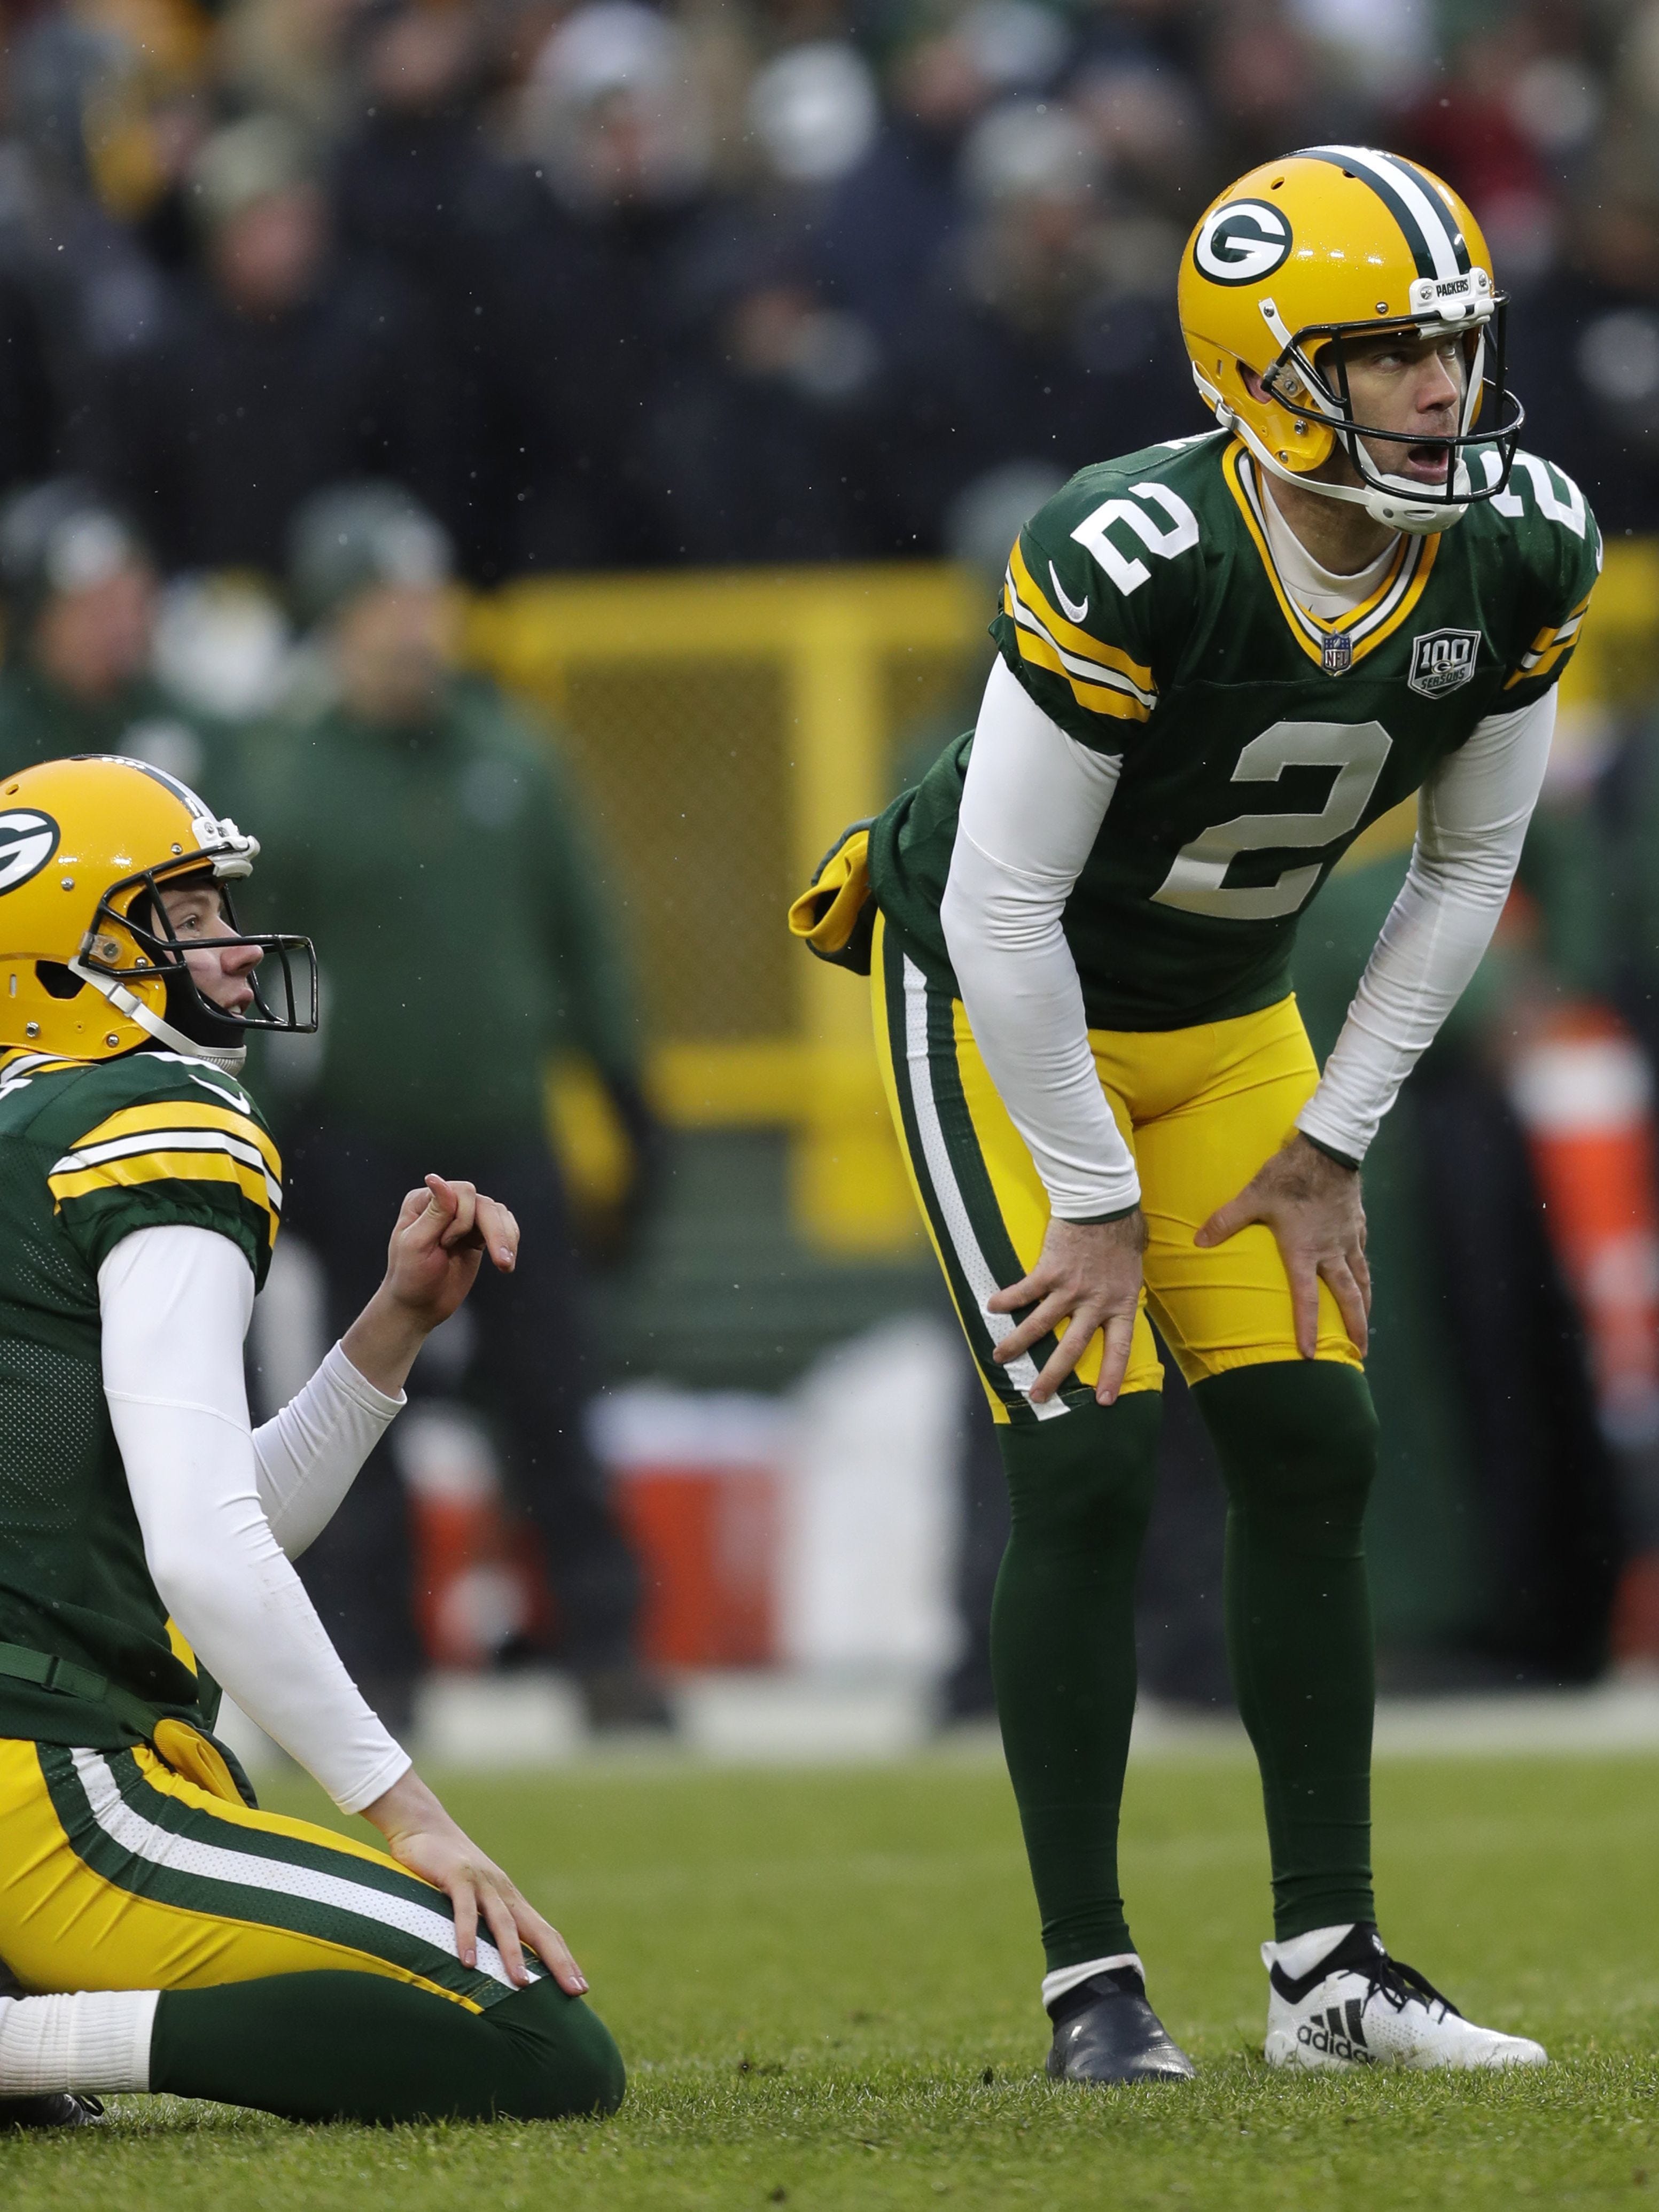 Packers kicker Mason Crosby (2) and punter J.K. Scott (left) watch after Crosby missed the game-tying field goal as time expires against the Arizona Cardinals on Dec. 2 at Lambeau Field in Green Bay.
 Dan Powers/USA TODAY NETWORK-Wisconsin
Green Bay Packers kicker Mason Crosby (2) and Green Bay Packers punter J.K. Scott (6) react to a misssing the potential game-tying fieldgoal as time expires against the Arizona Cardinals Sunday, December 2, 2018, at Lambeau Field in Green Bay, Wis. 
Dan Powers/USA TODAY NETWORK-Wisconsin
Sunday, December 2, 2018, at Lambeau Field in Green Bay, Wis. 
Dan Powers/USA TODAY NETWORK-Wisconsin